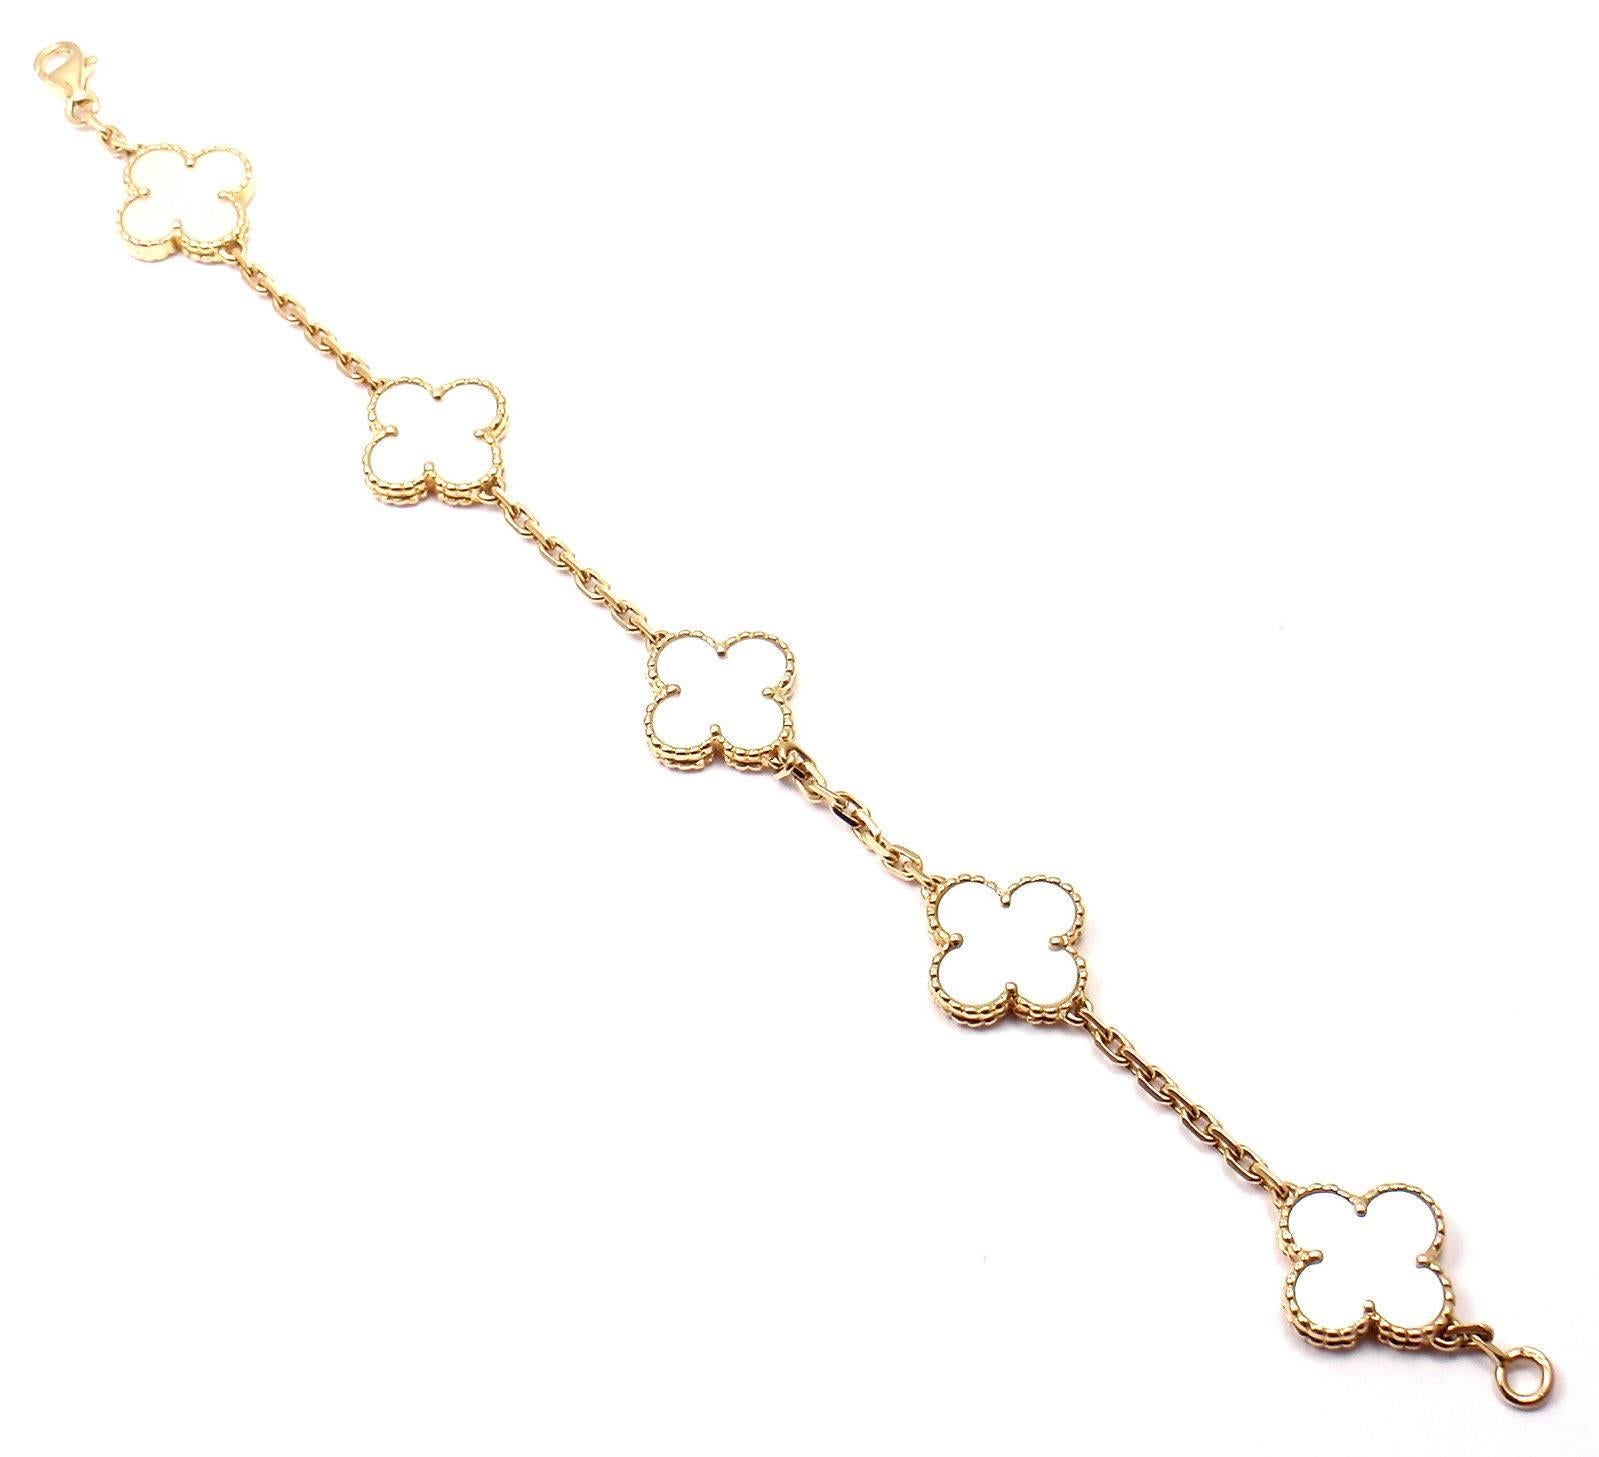 18k Yellow Gold 5-Motif Mother of Pearl Bracelet by Van Cleef & Arpels. 
Part of VCA's absolutely stunning 